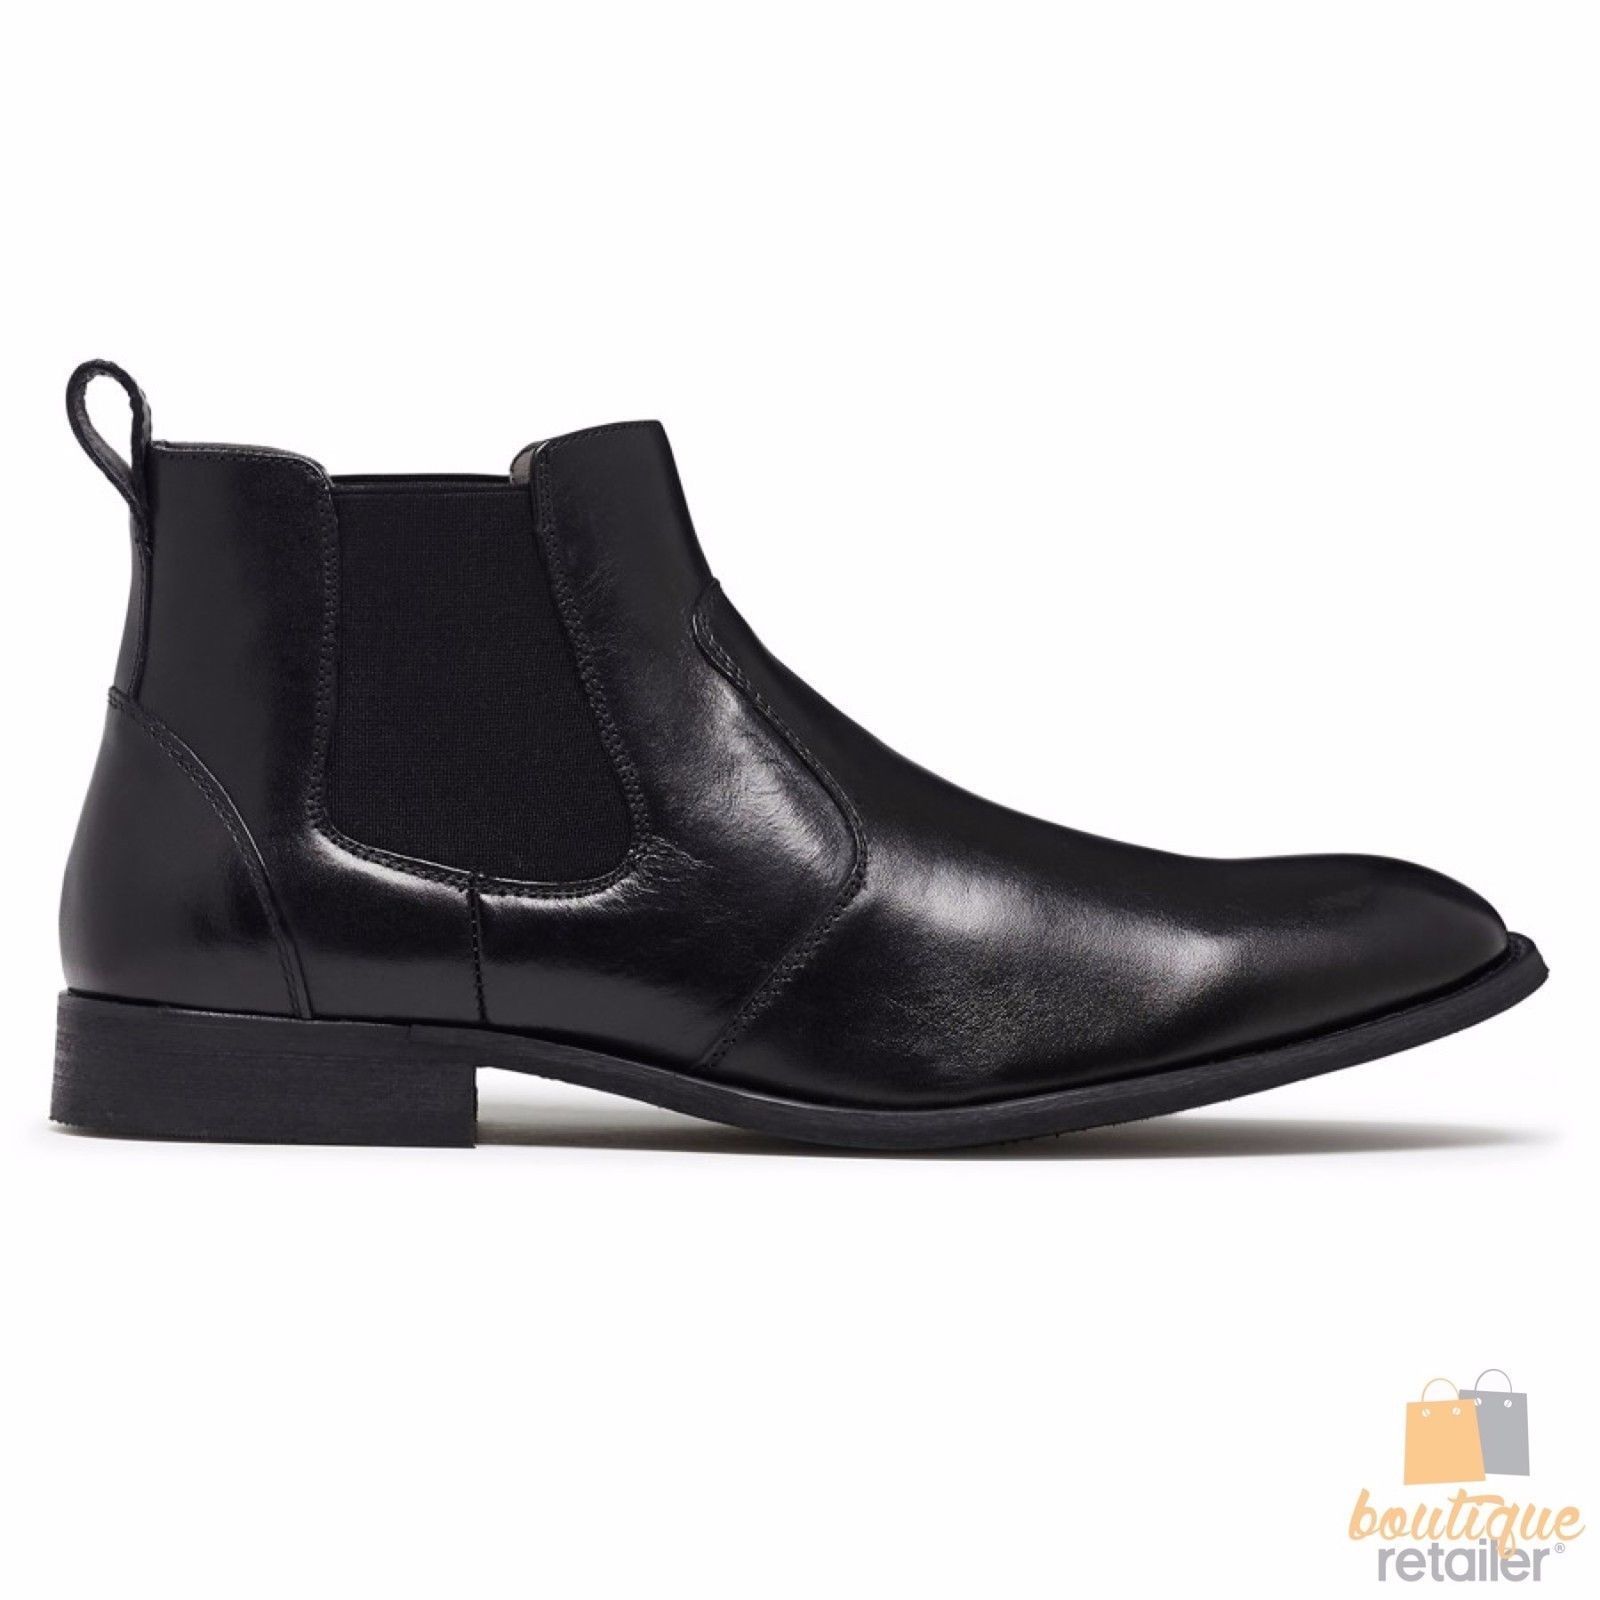 JULIUS MARLOW Harry Leather Boots Mens Slip On Dress Work Chelsea Shoes